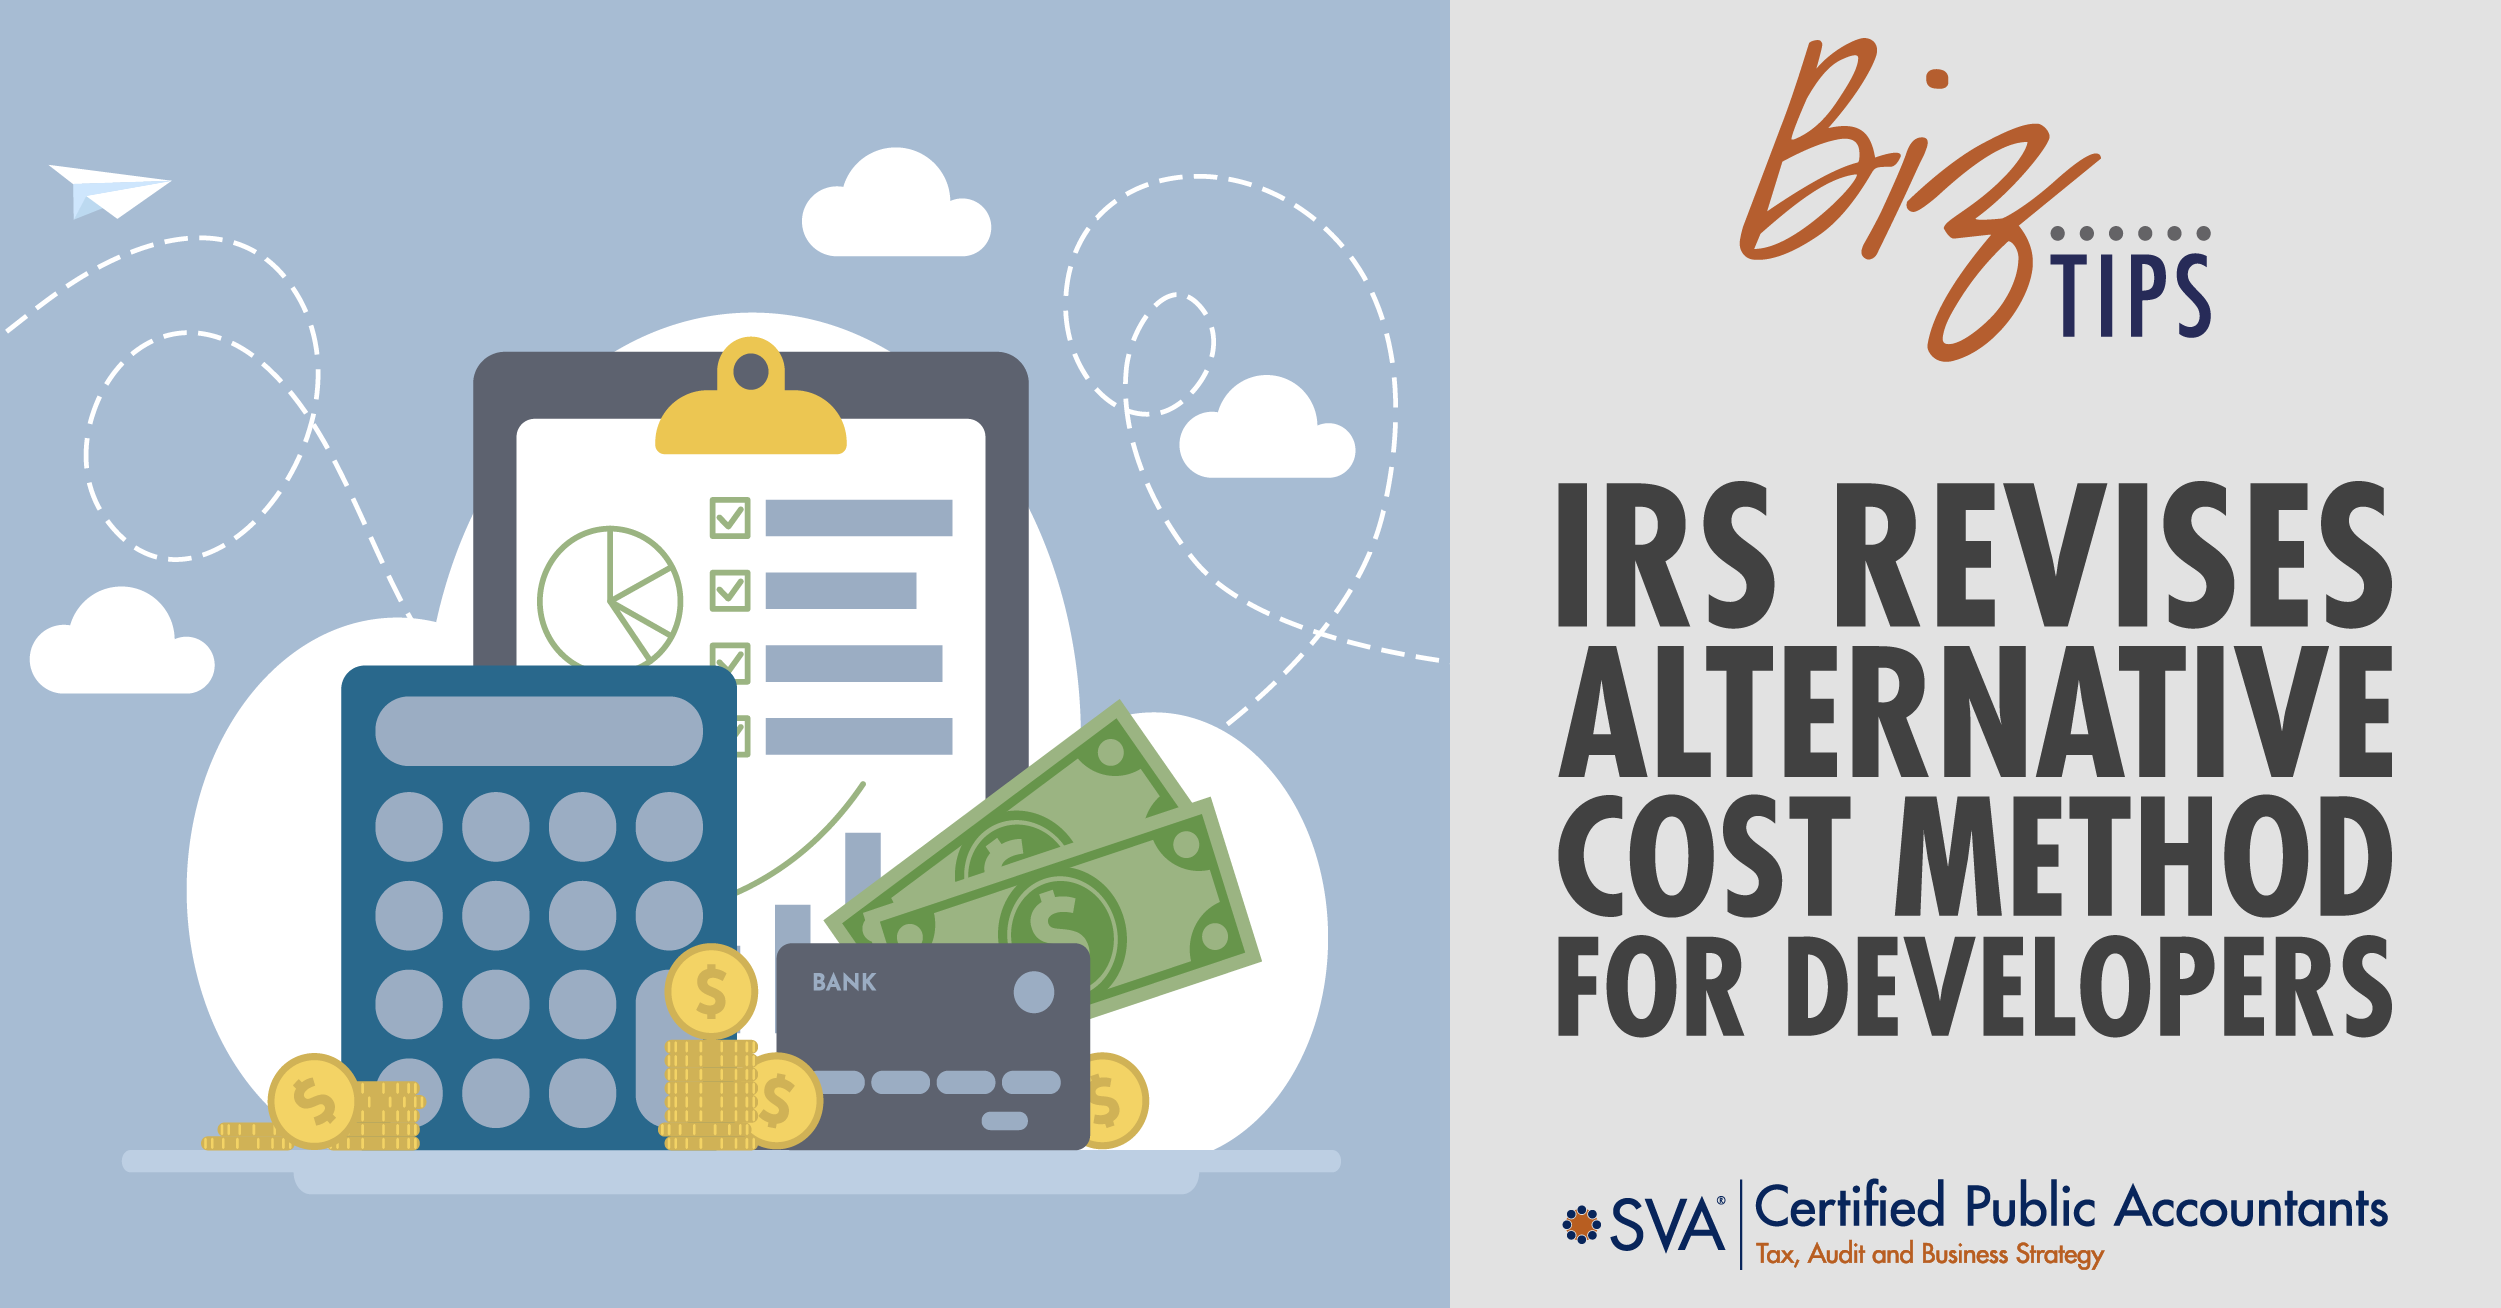 IRS Revises Alternative Cost Method for Developers